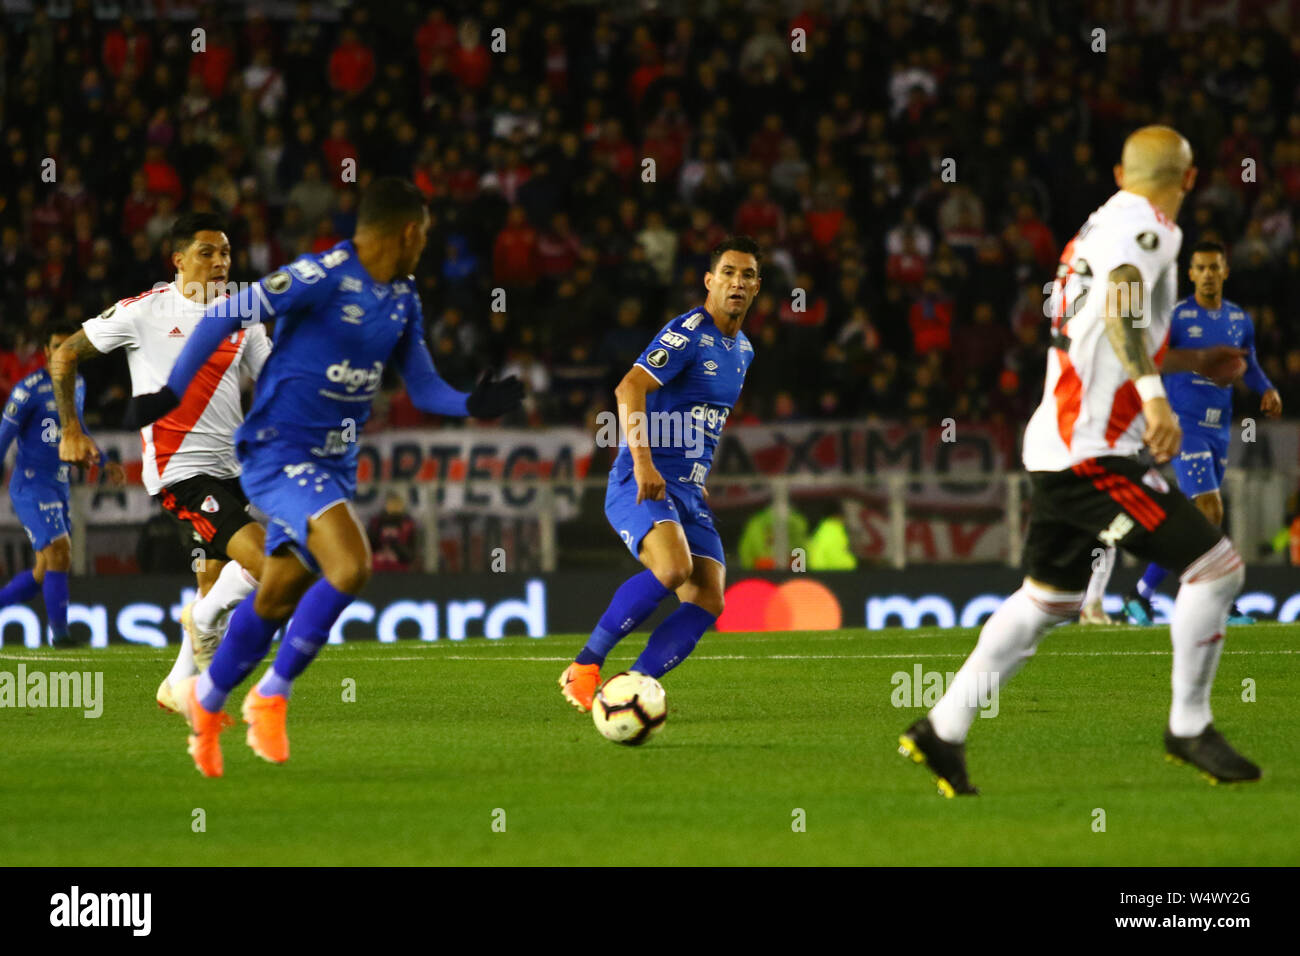 BUENOS AIRES, 23.07.2019: Thiago Neves during the match between River Plate (ARG) and Cruzeiro (BRA) for match of Conmebol Libertadores on Monumental Stock Photo